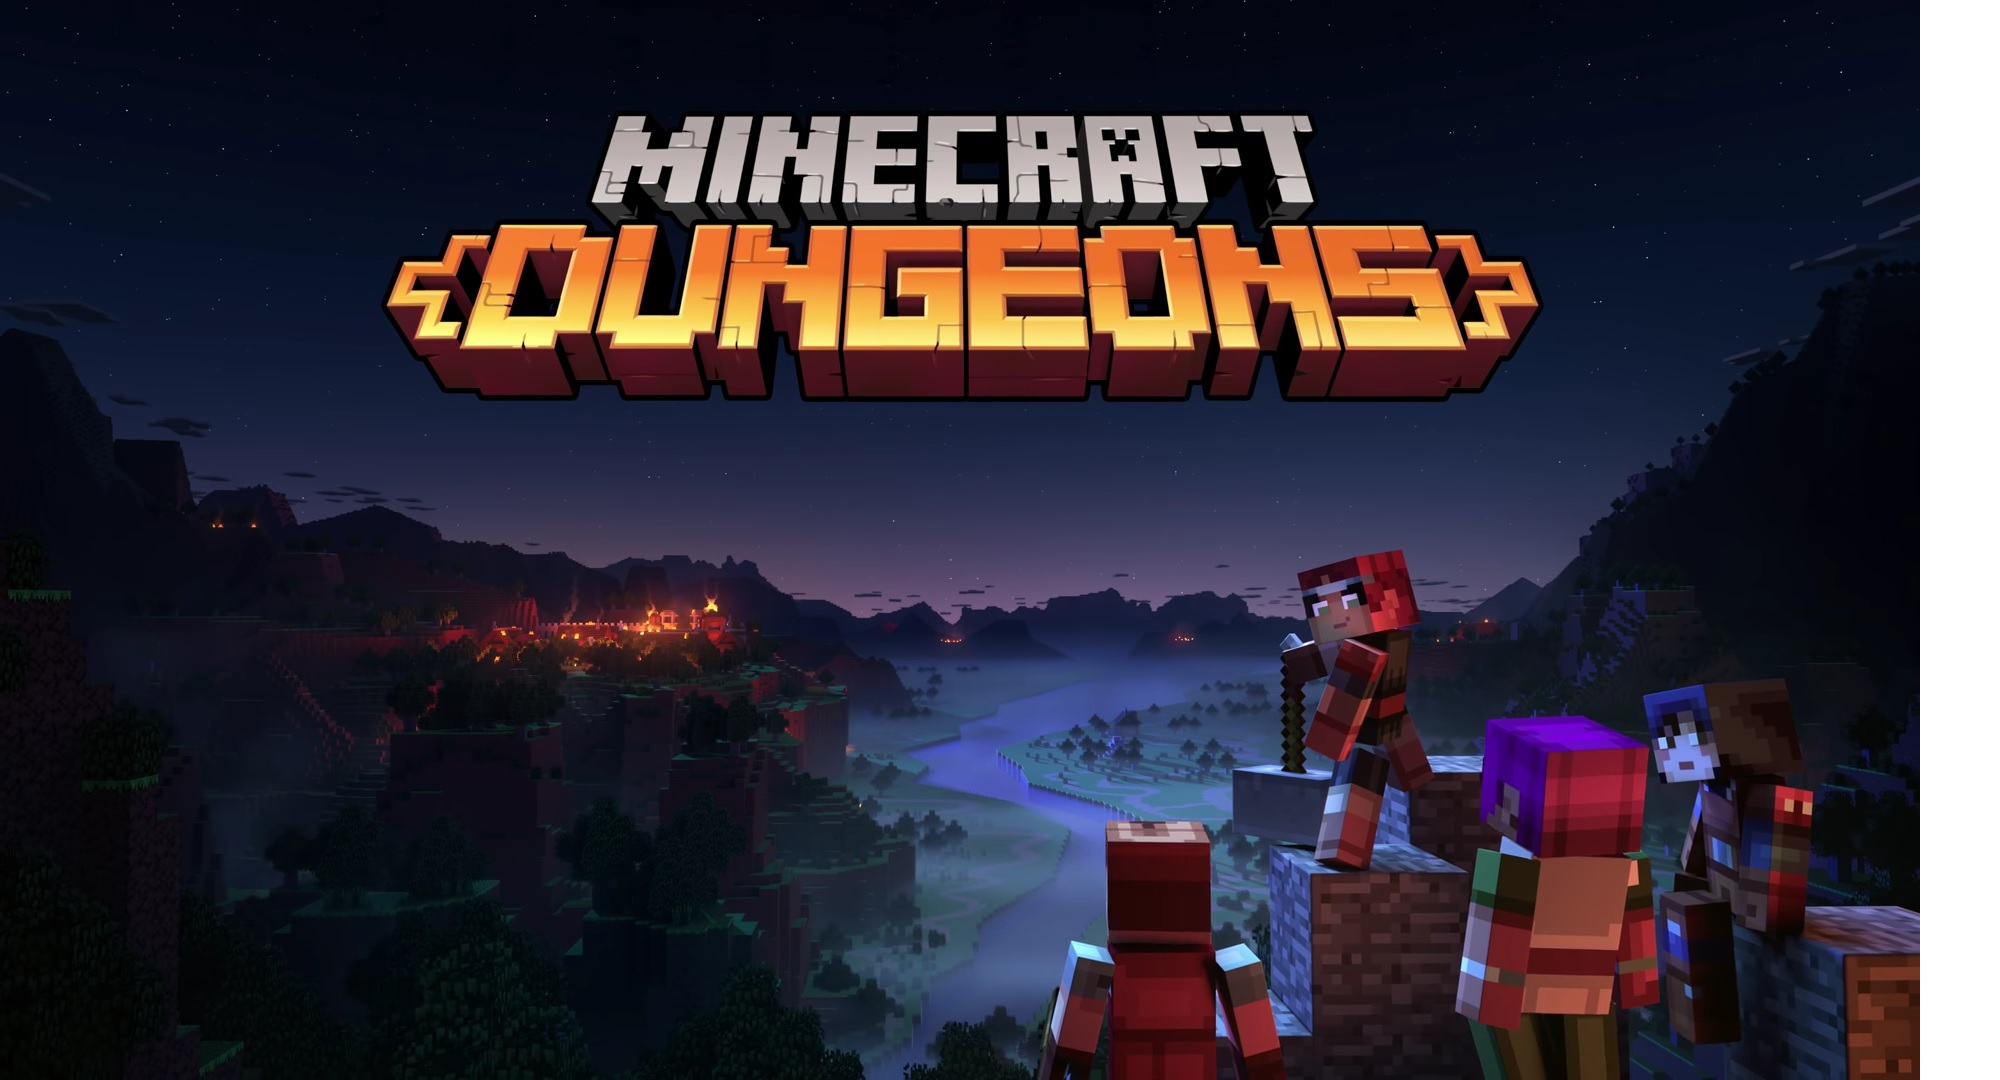 minecraft dungeons free to play